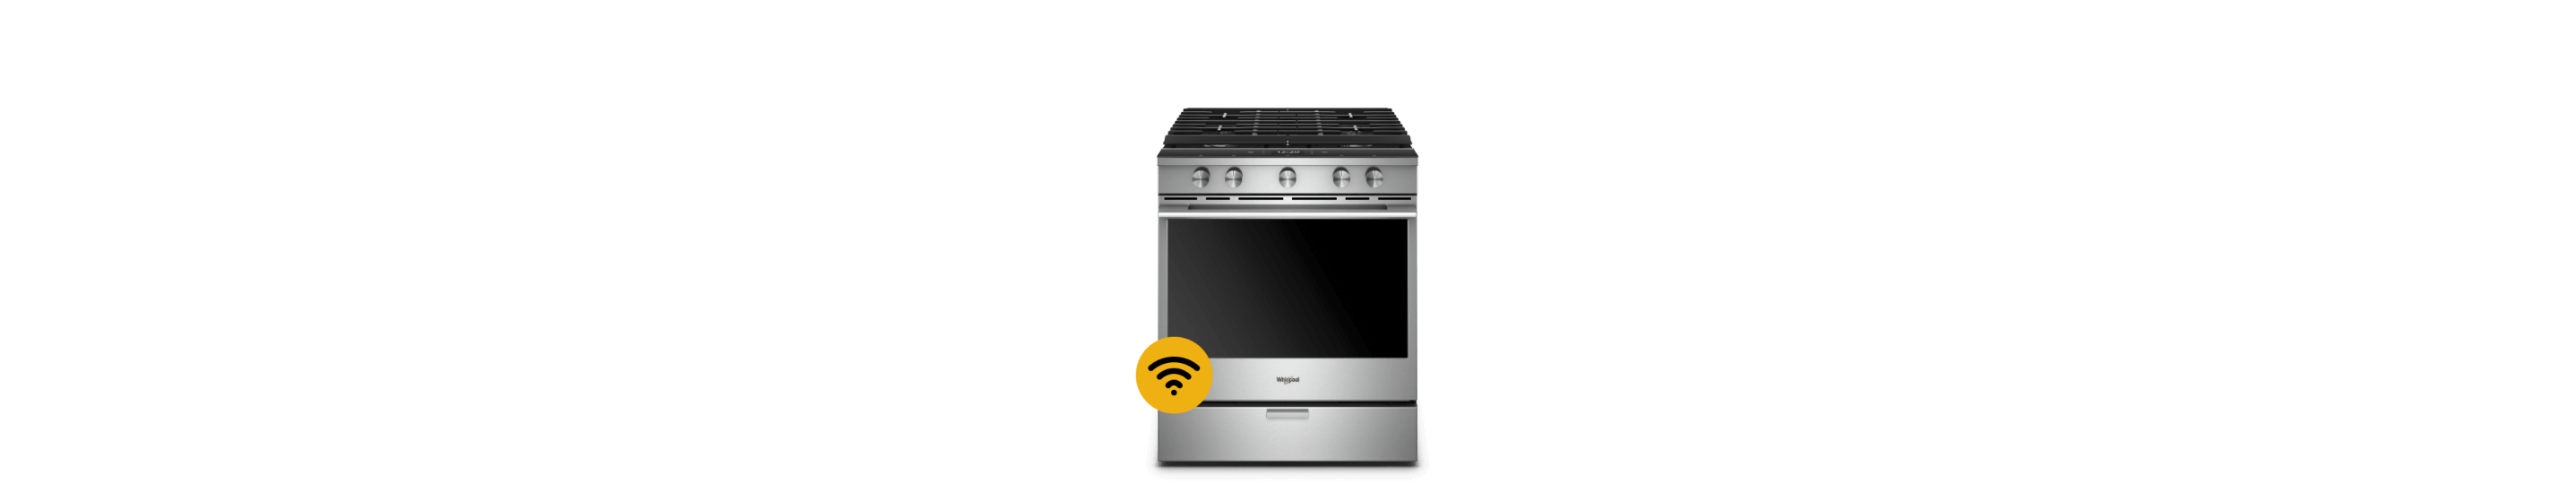 $2000 OFF CUISINIERE WOOD COOK OVEN - ONLY 1 LEFT - household